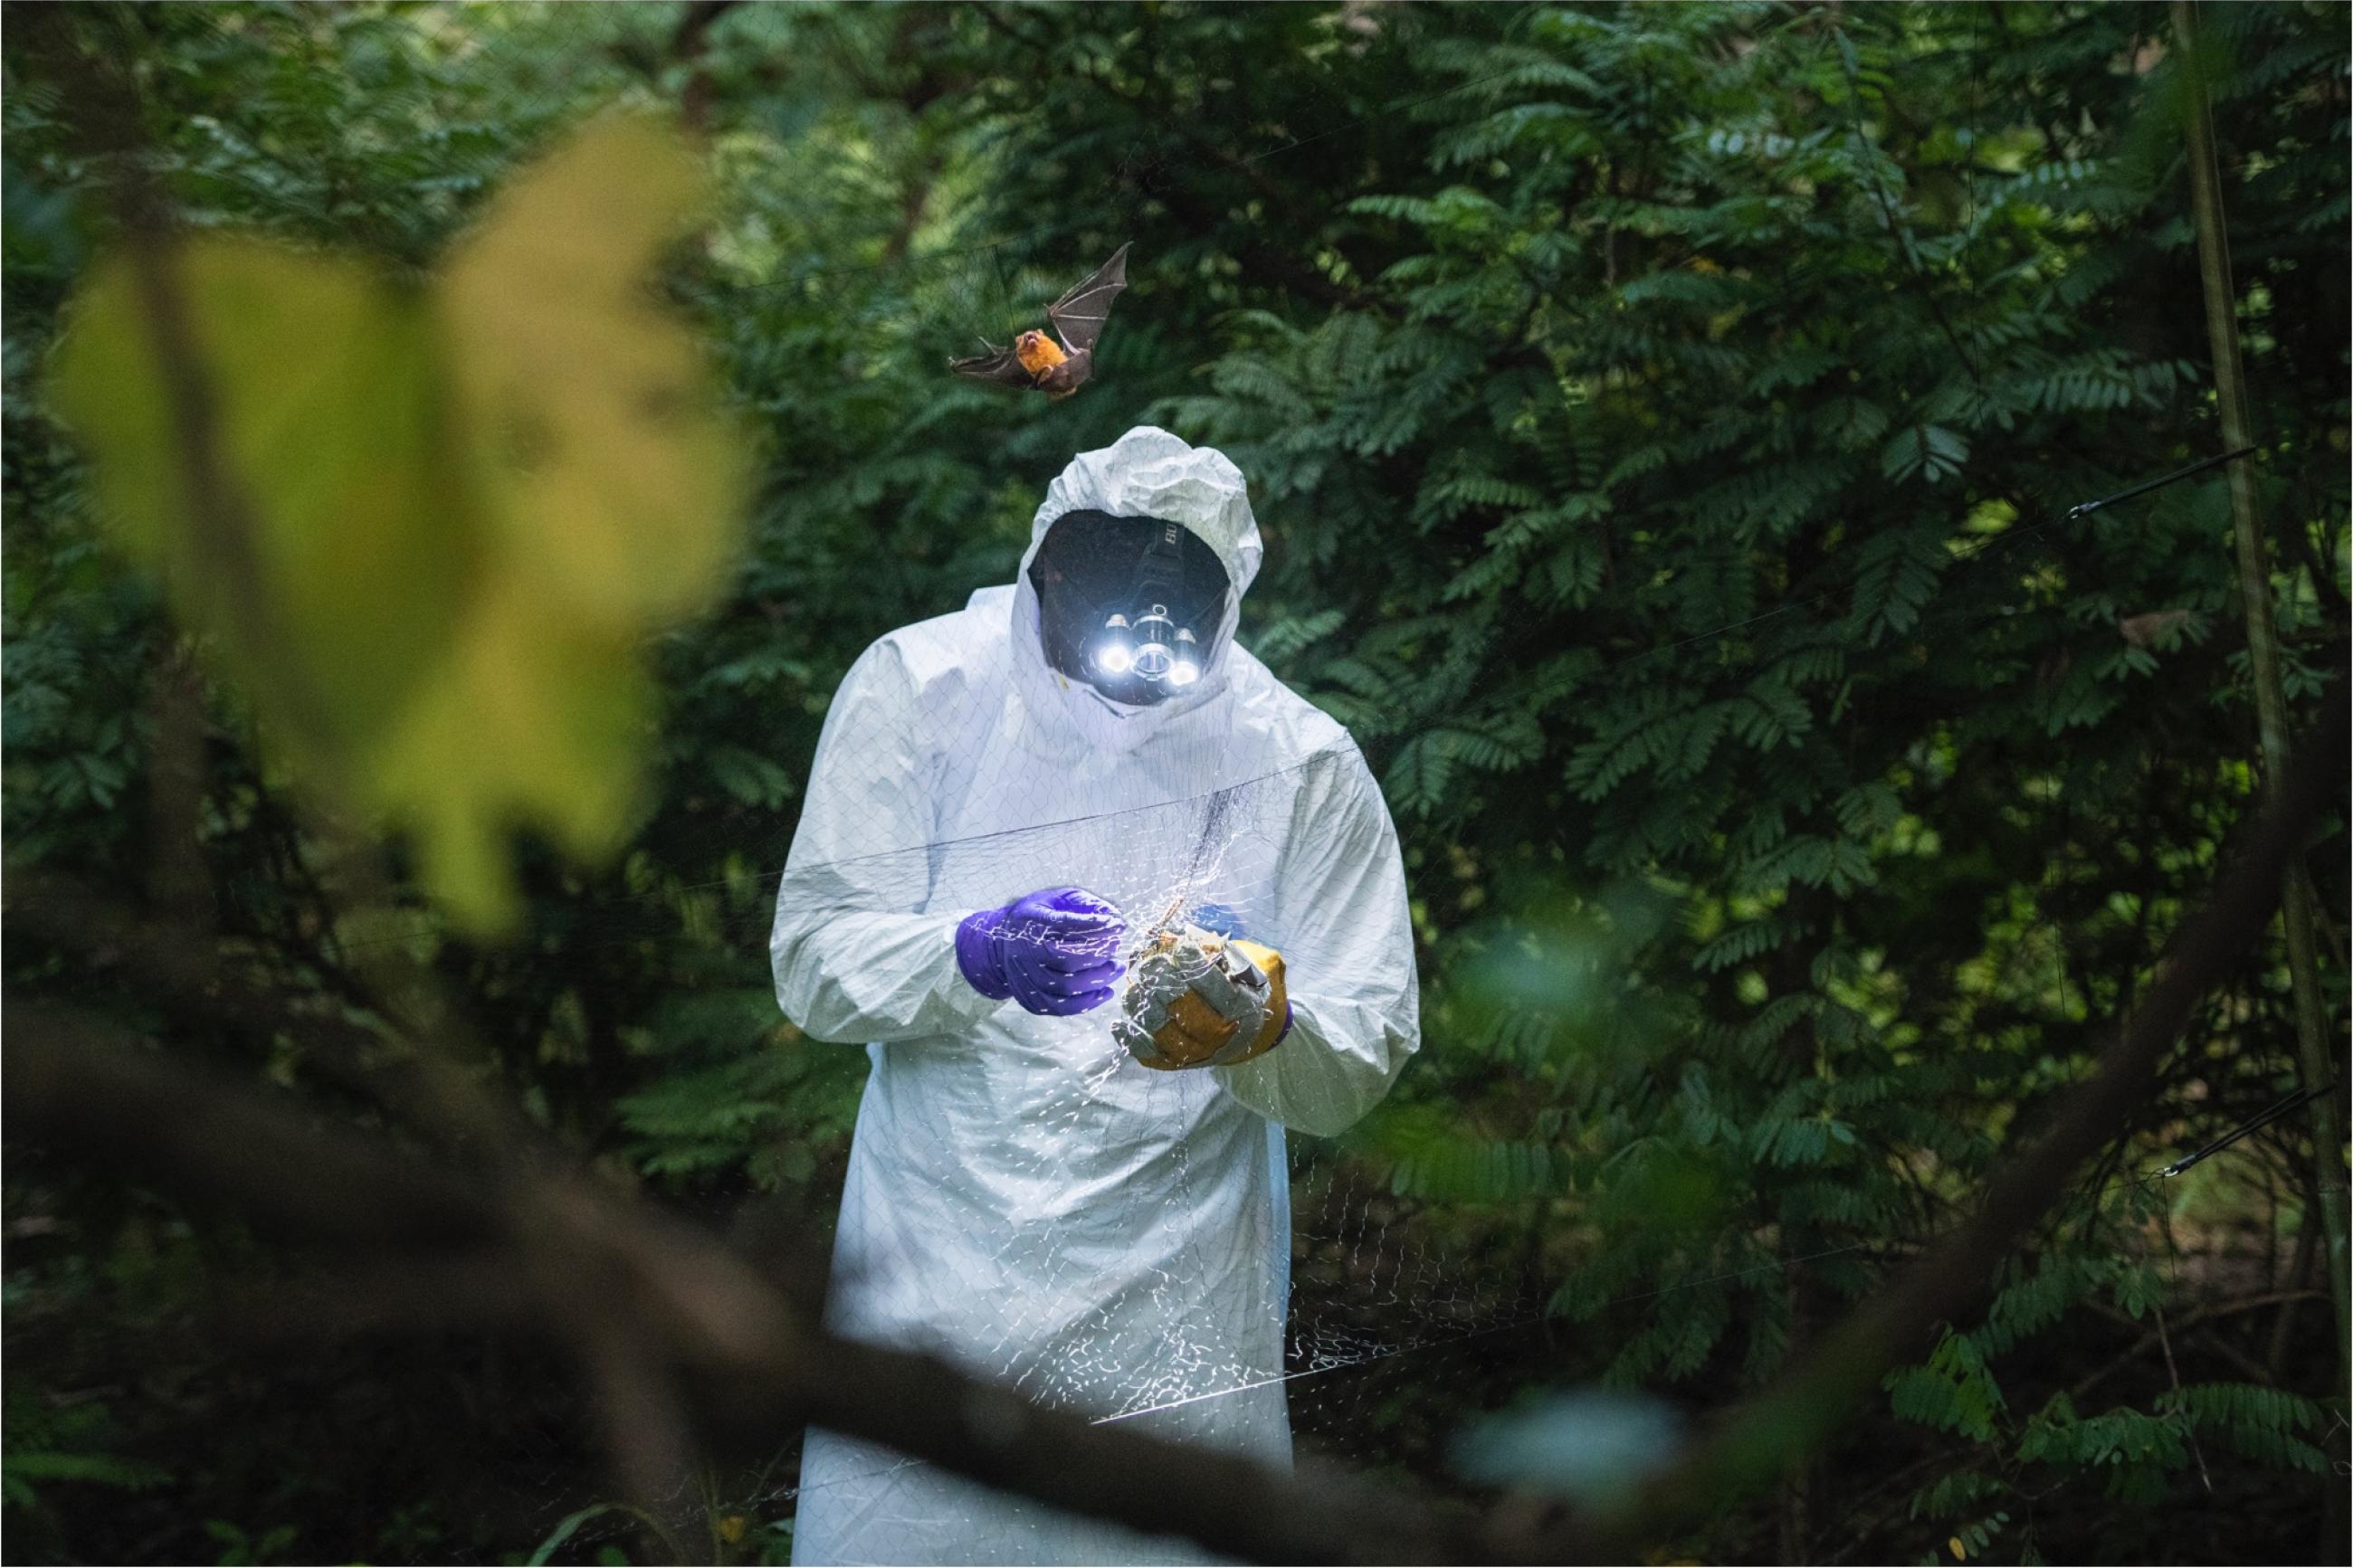 A field ecologist with the USAID-funded PREDICT Ebola Host Project uses mist netting to capture and study bats, an animal host species of the zoonotic Ebola virus. 